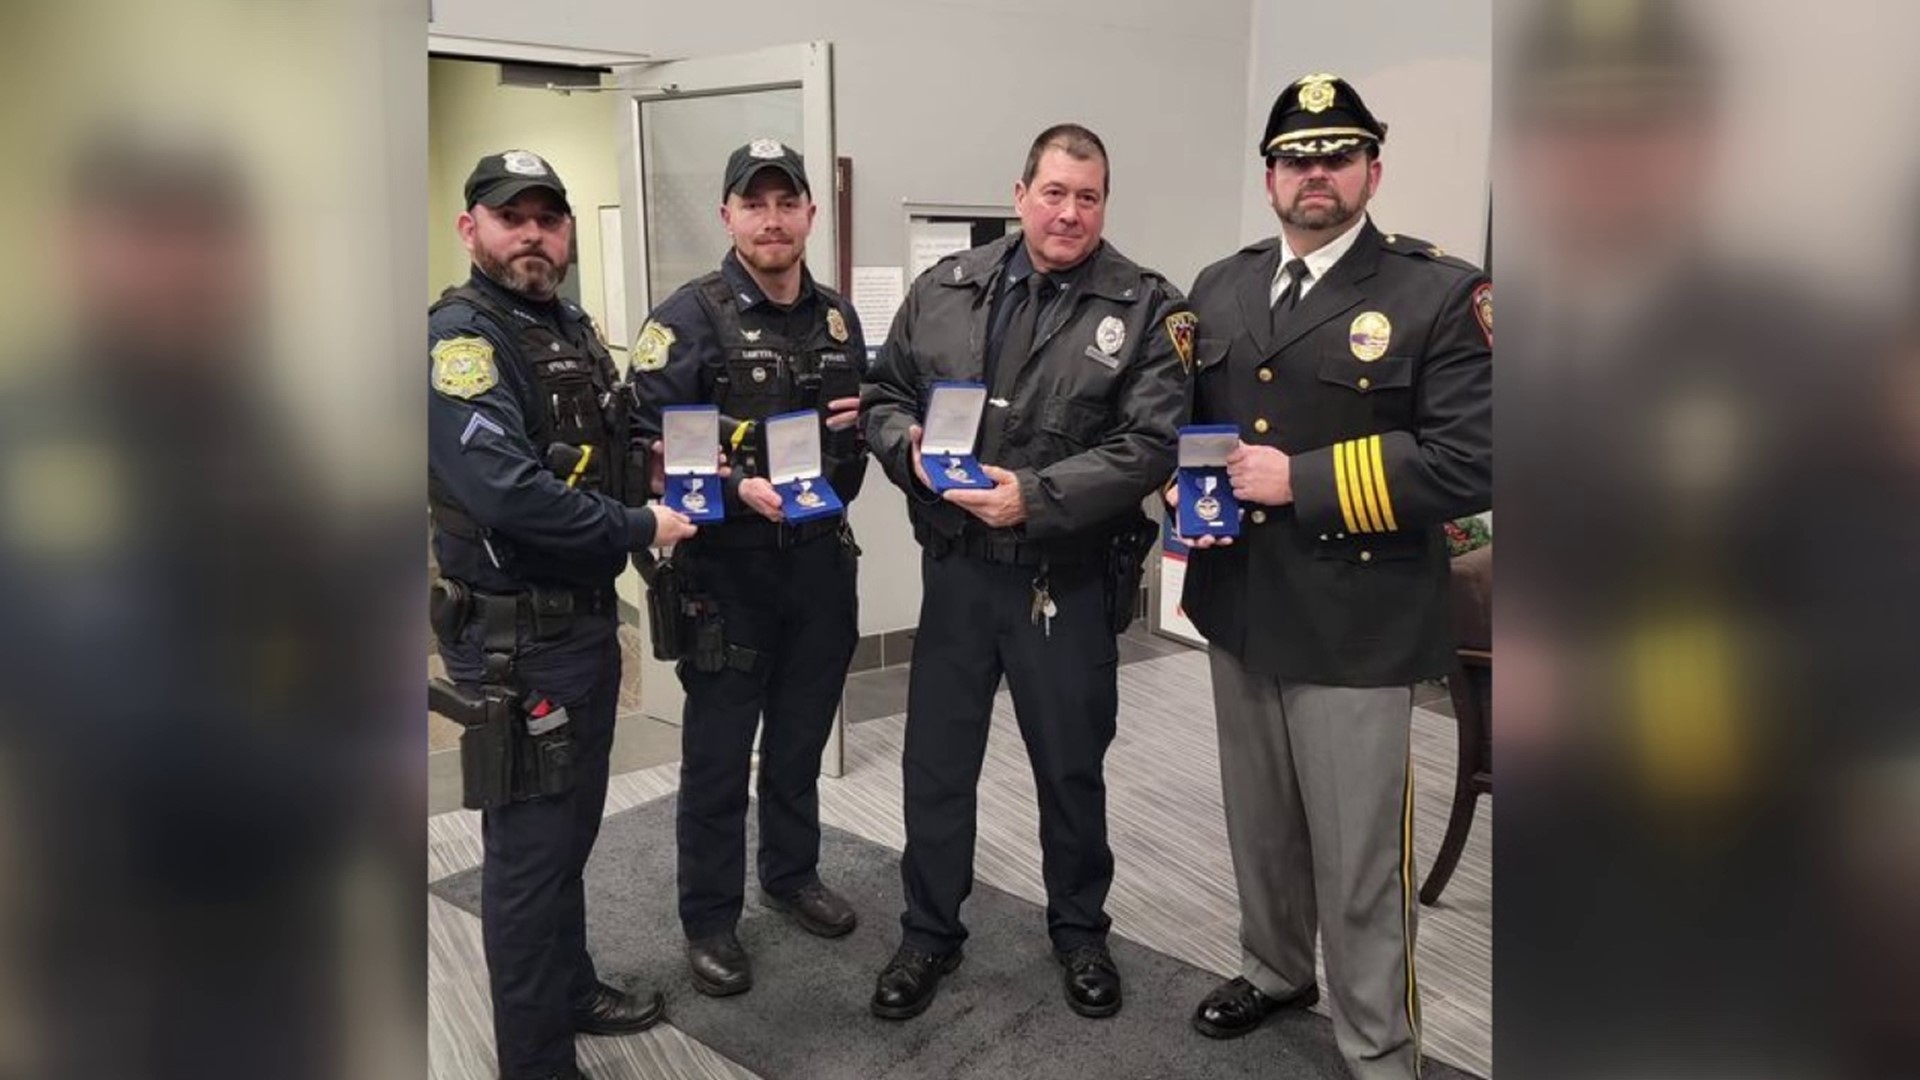 Dickson City Police Officers were awarded medals for service above and beyond the call of duty during 2023.